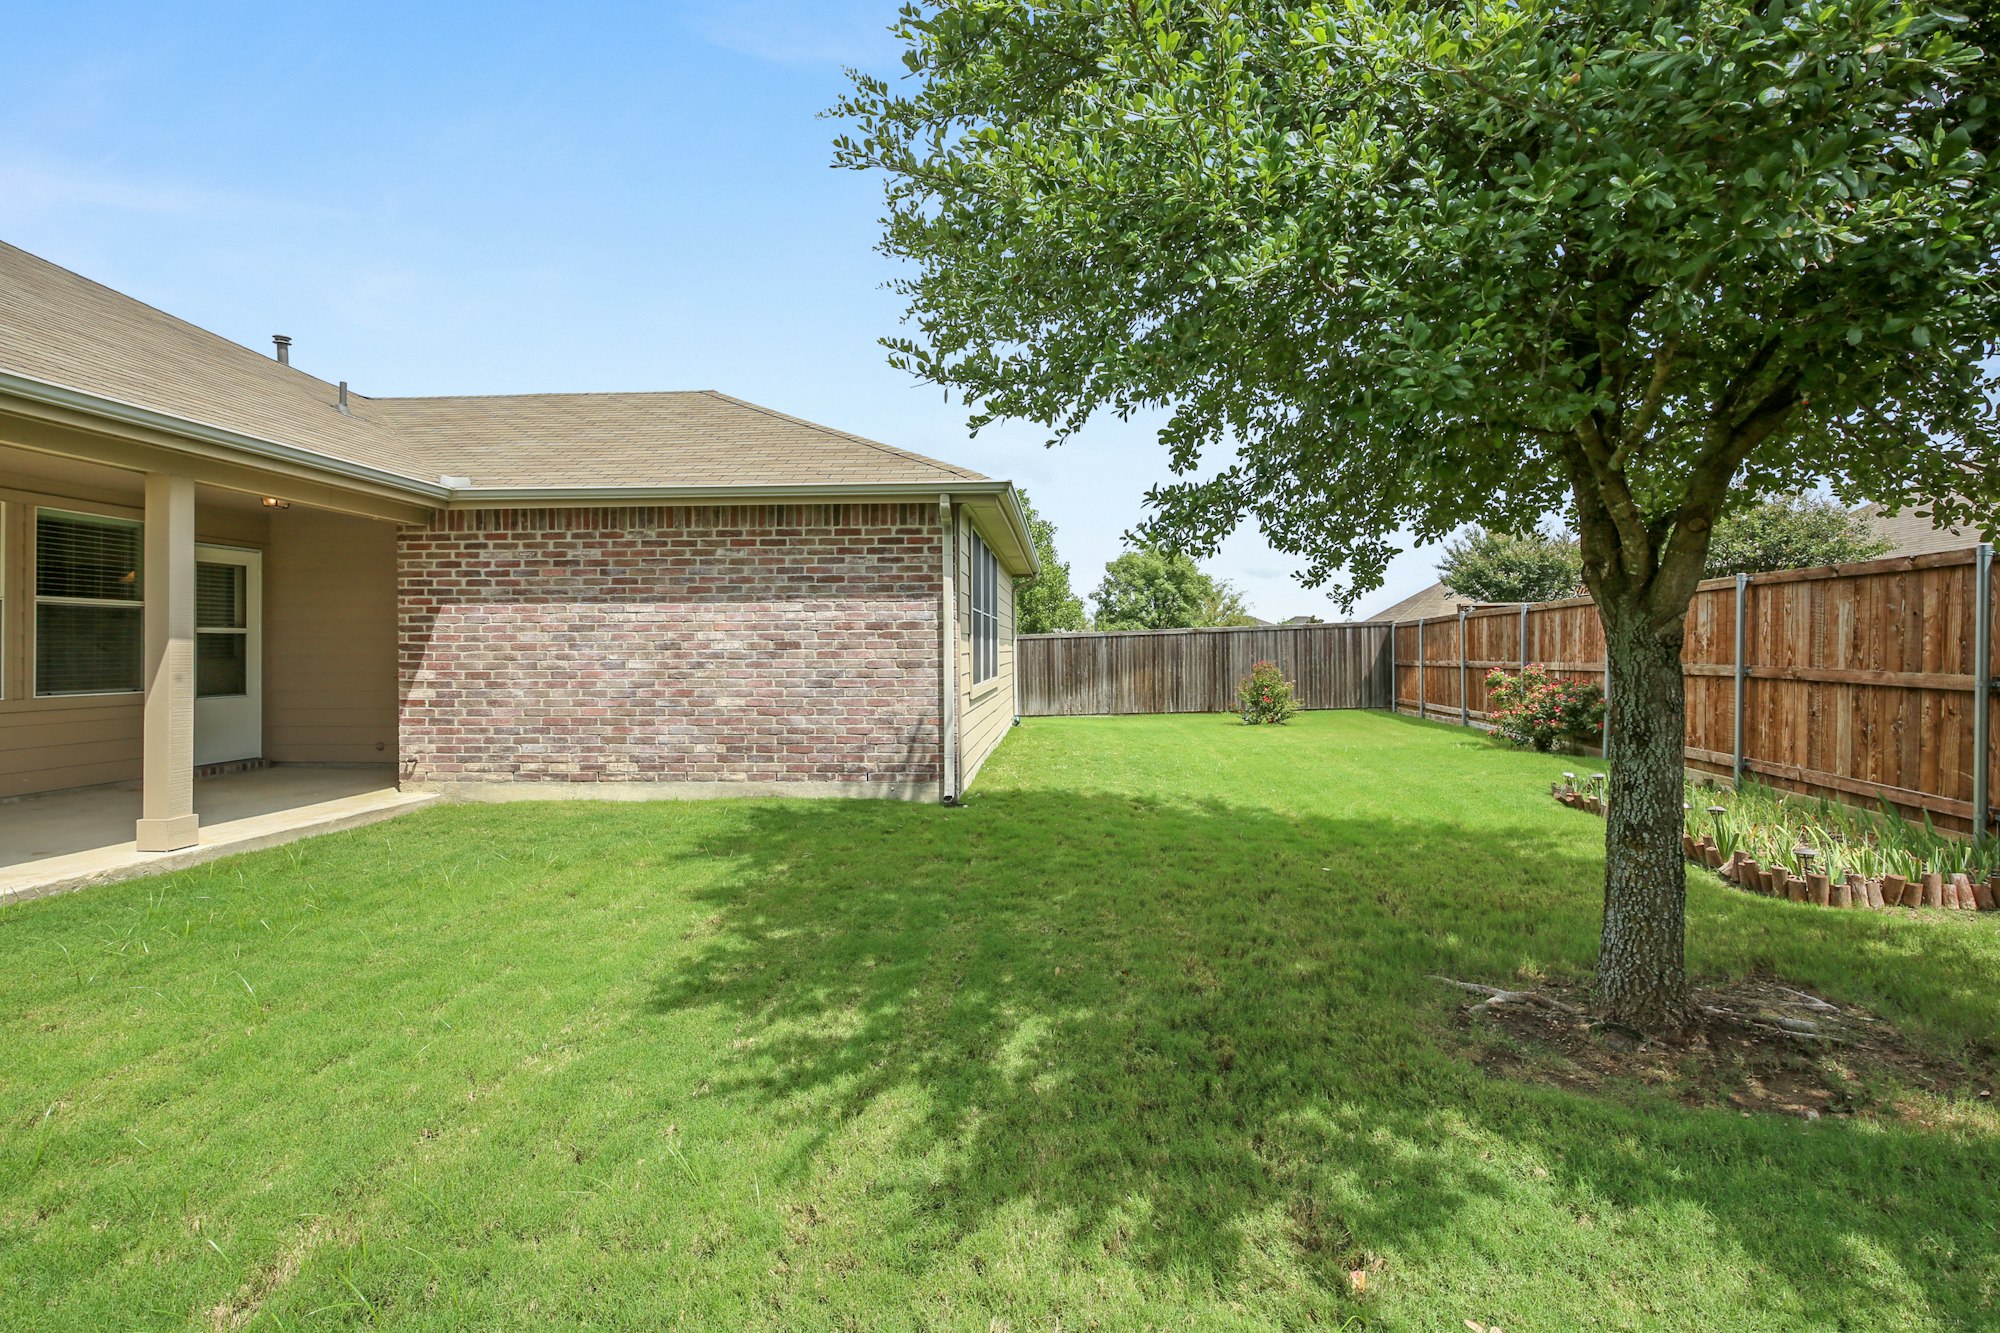 Photo 1 of 25 - 419 Spruce Trl, Forney, TX 75126